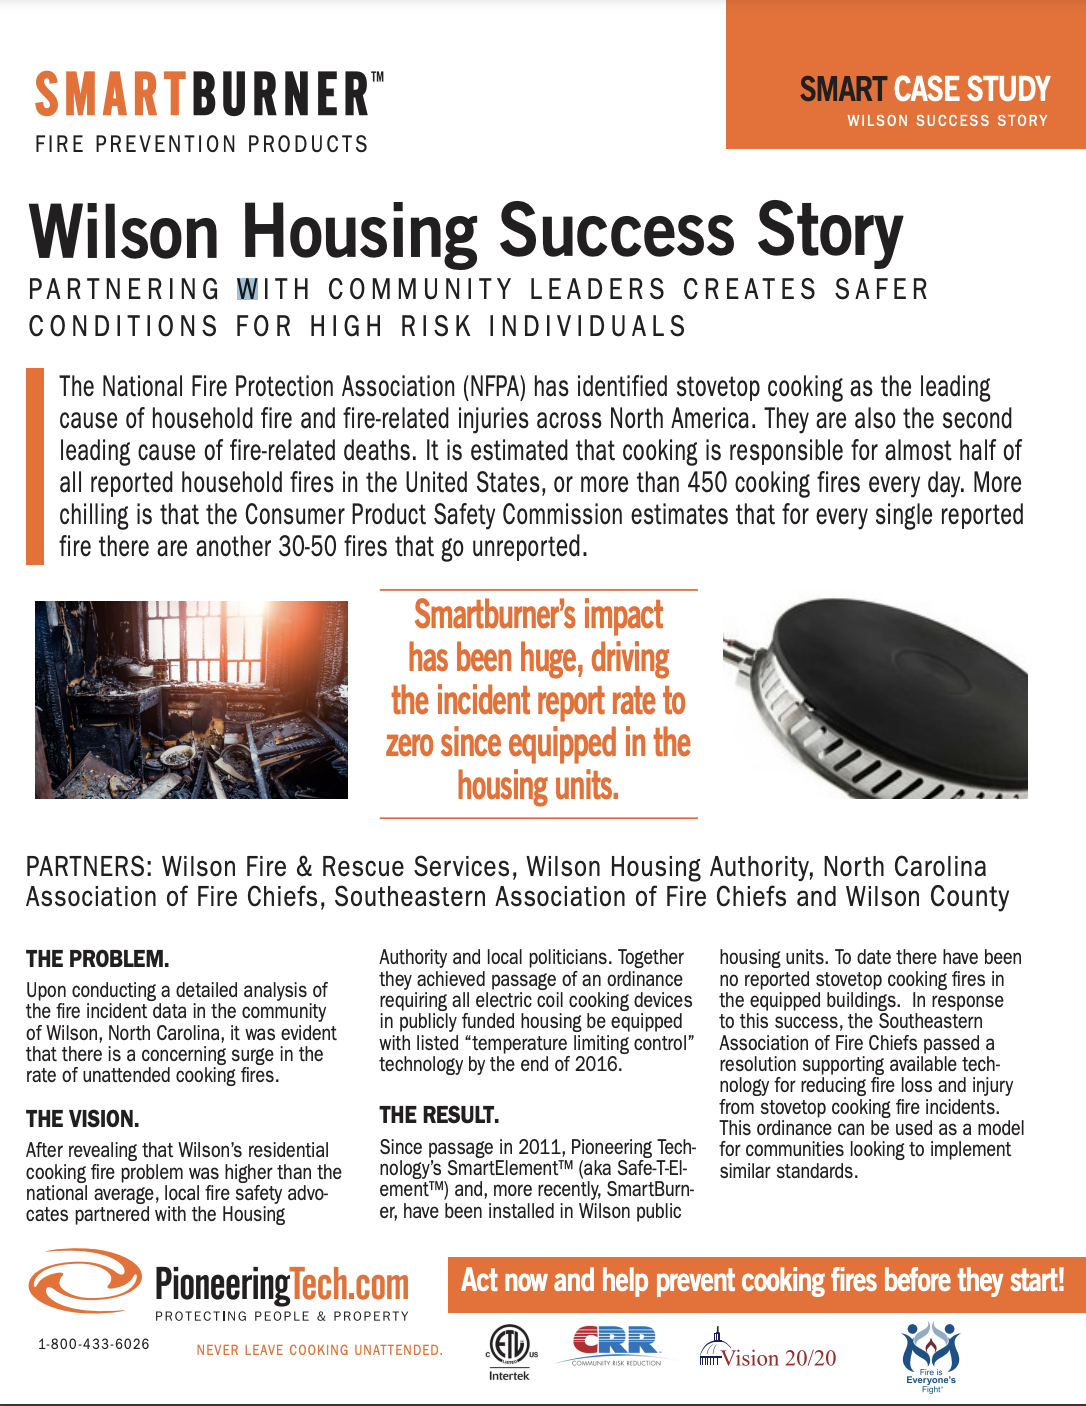 Wilson Housing Success Story by Pioneering Technology Corp.